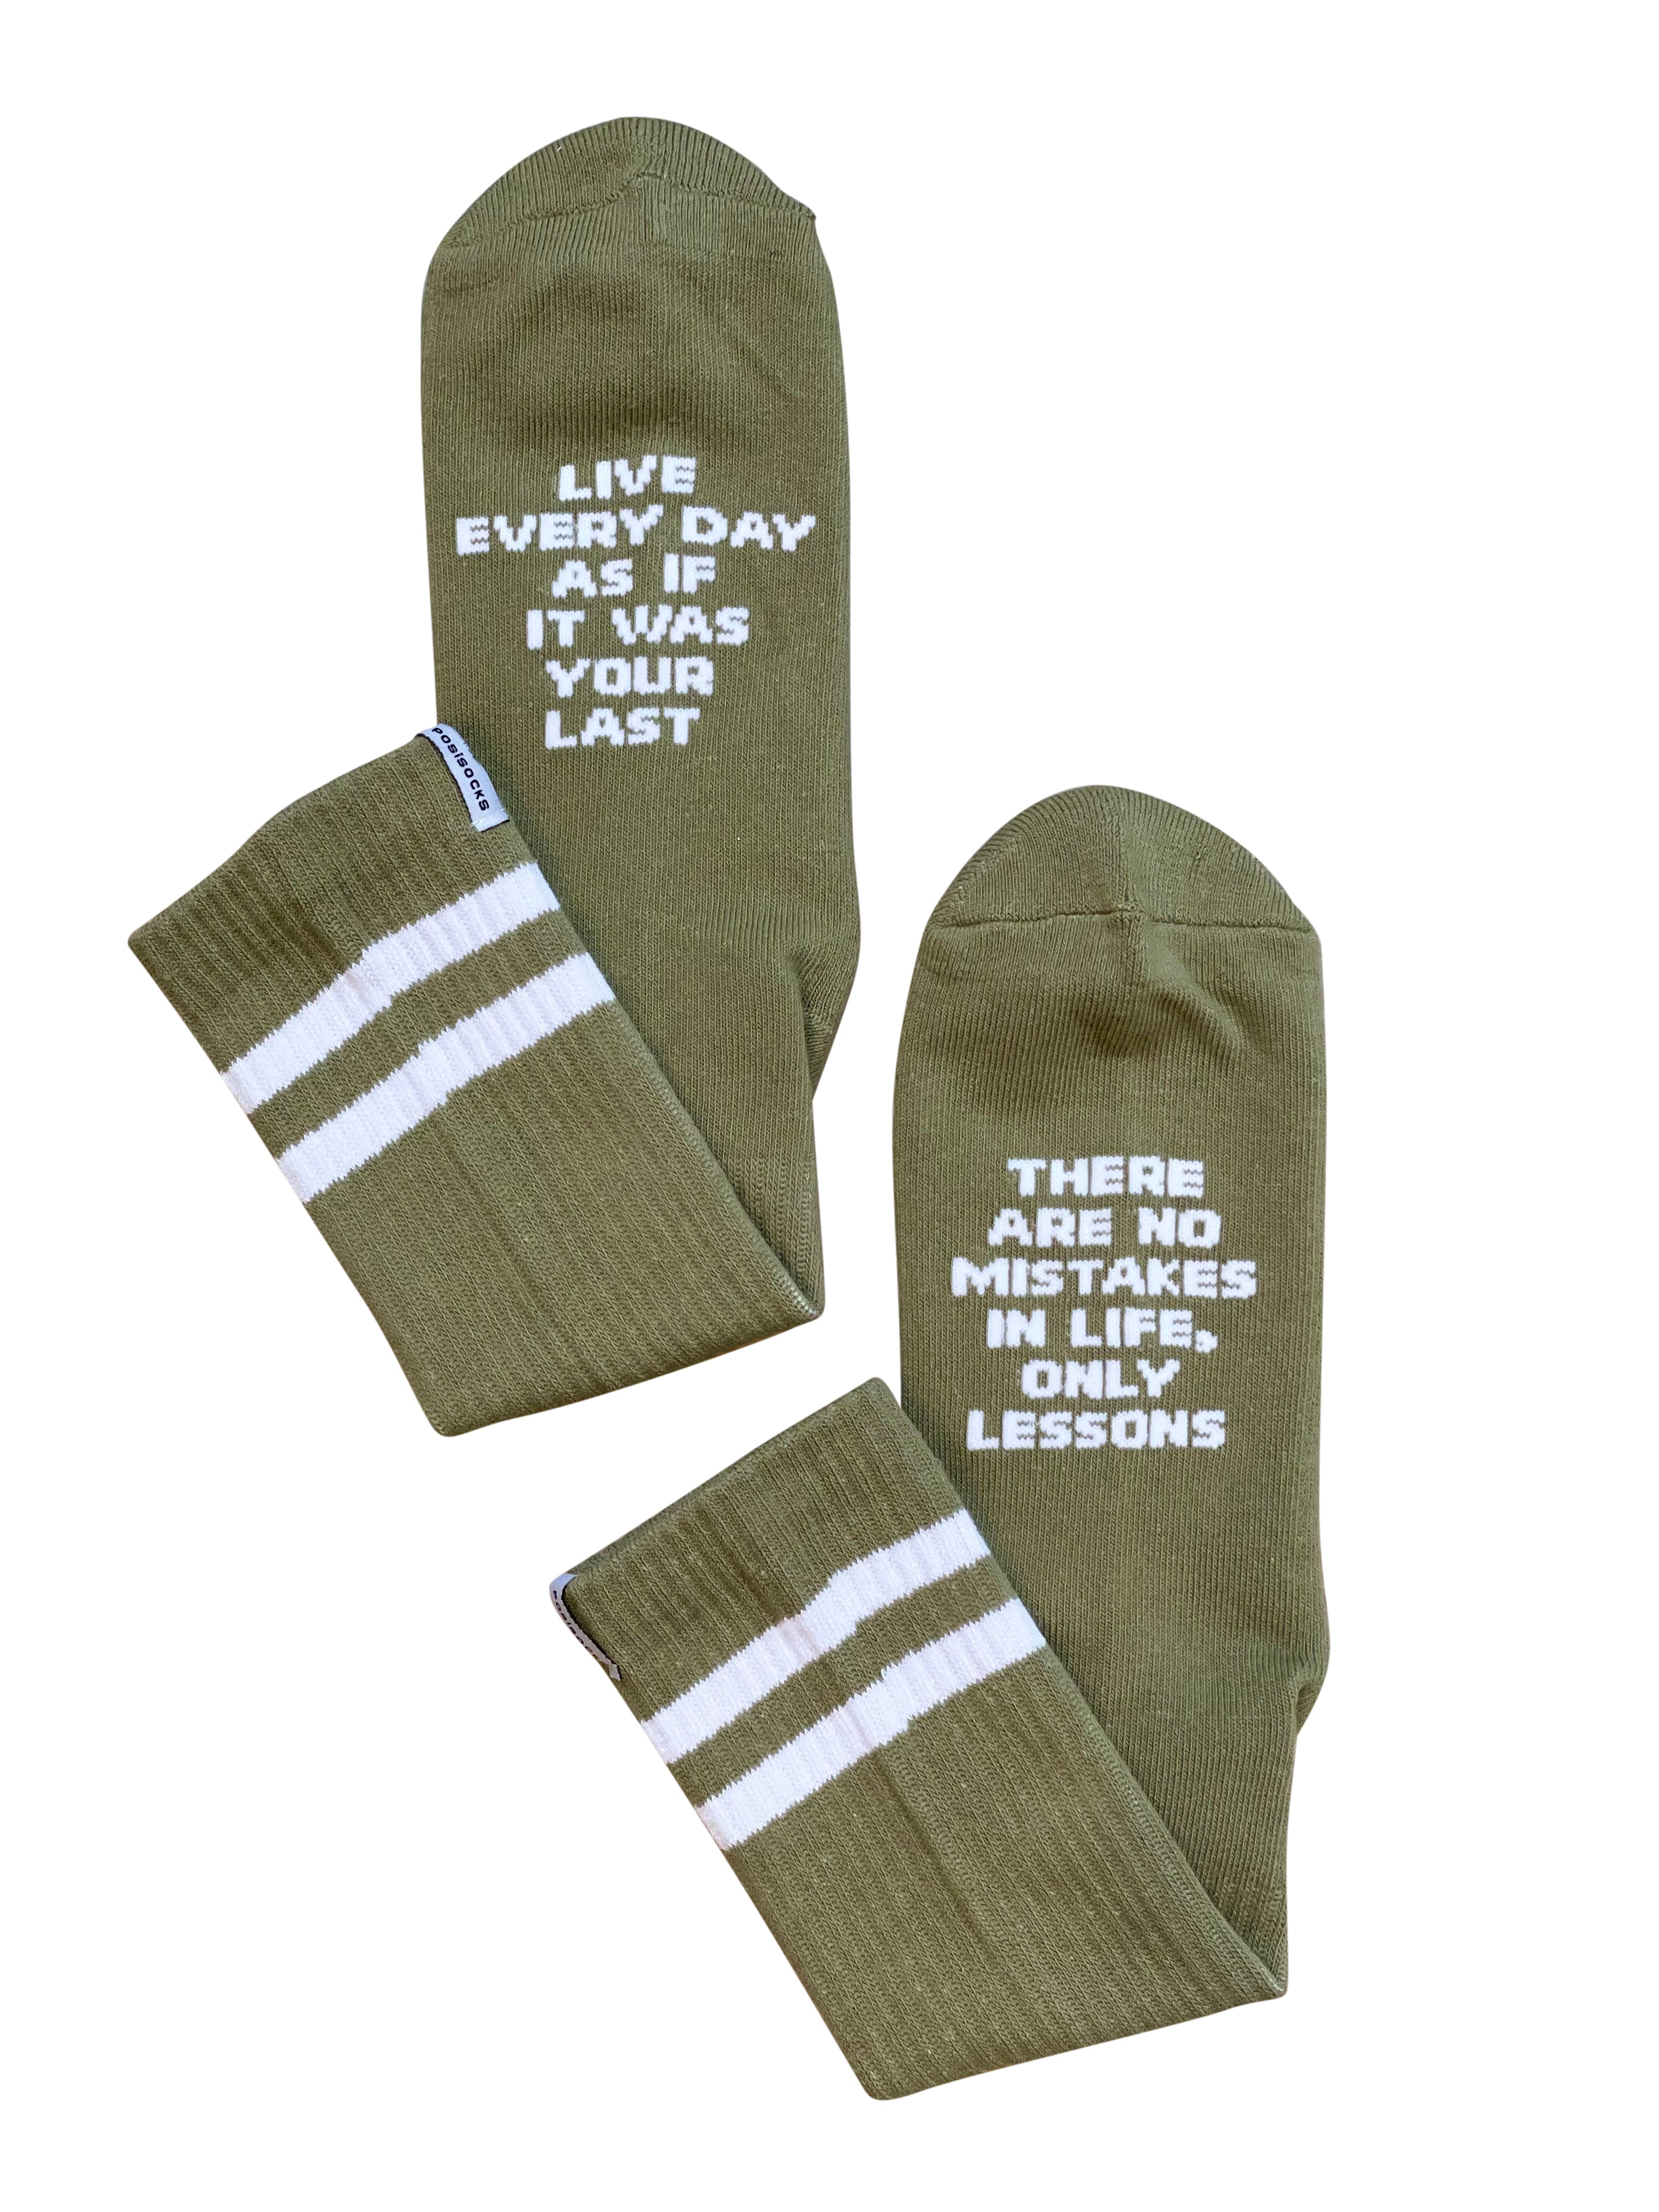 Men's Living Crew Socks with positive affirmations